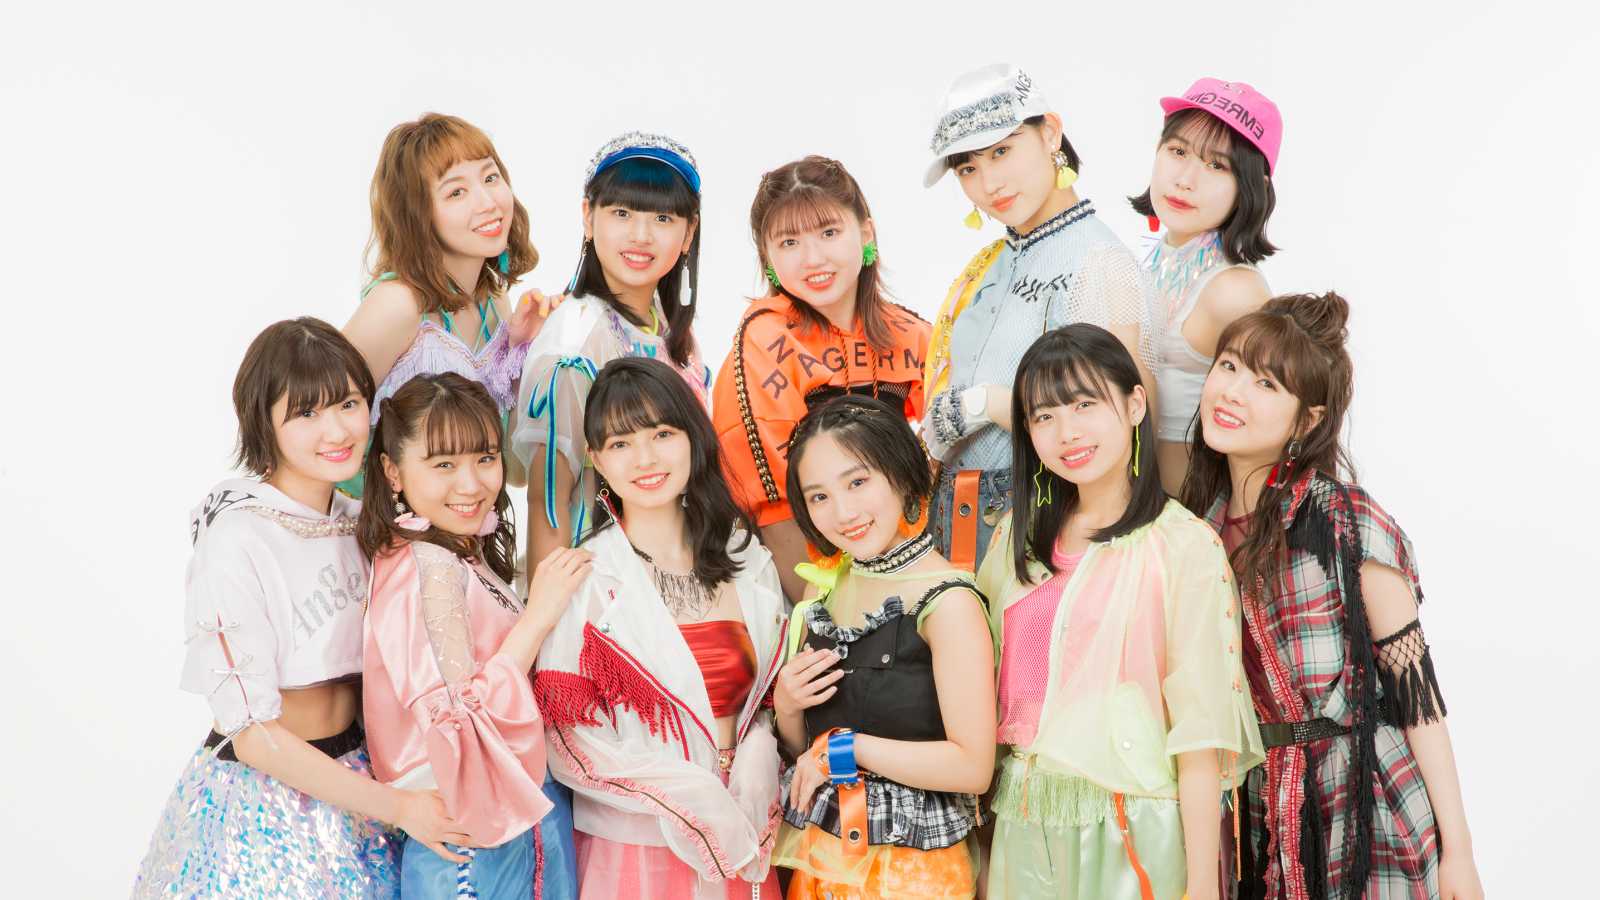 ANGERME llega a México © DC FACTORY. All rights reserved.